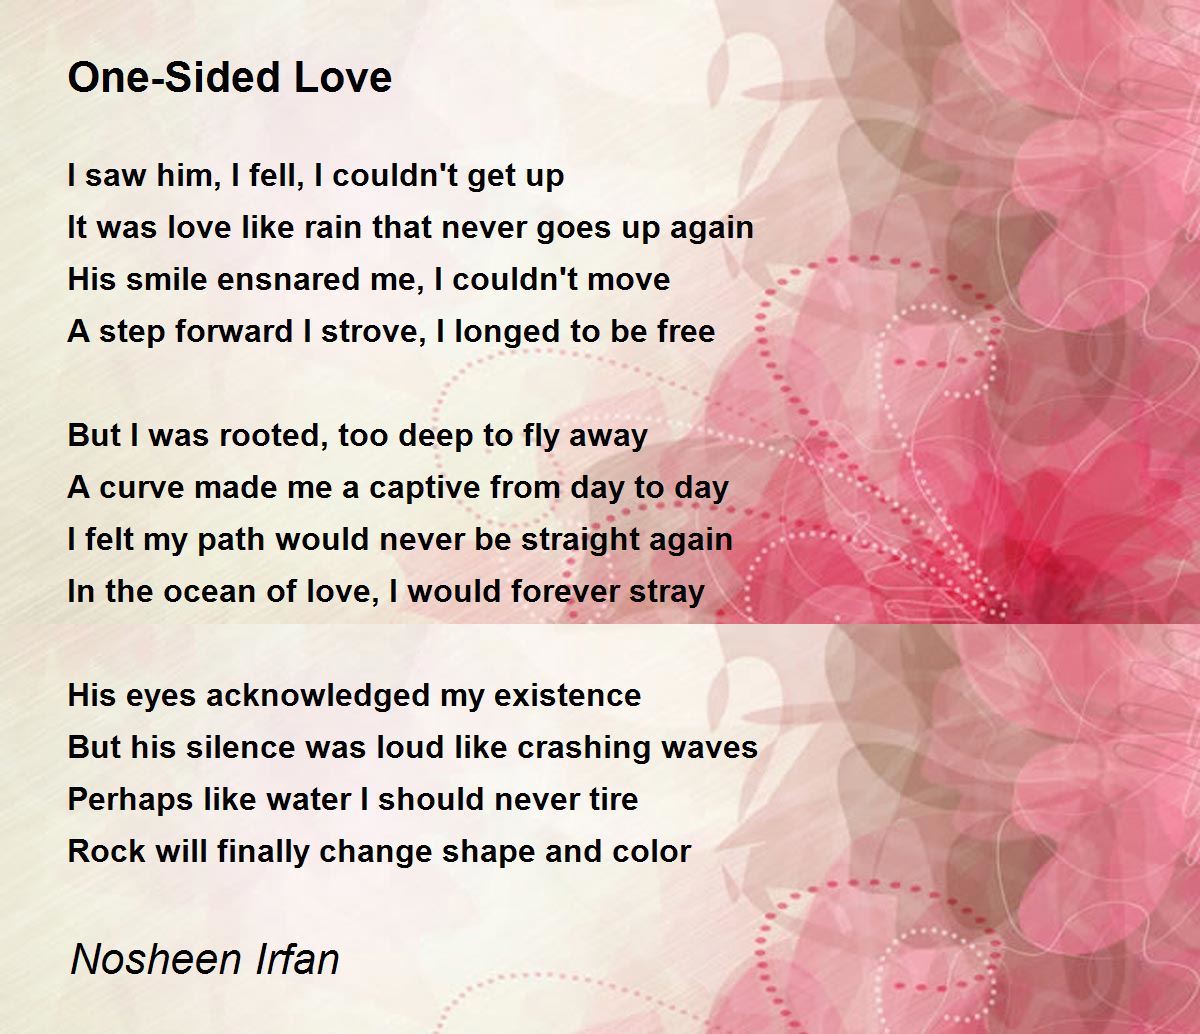 One-Sided Love - One-Sided Love Poem by Nosheen Irfan